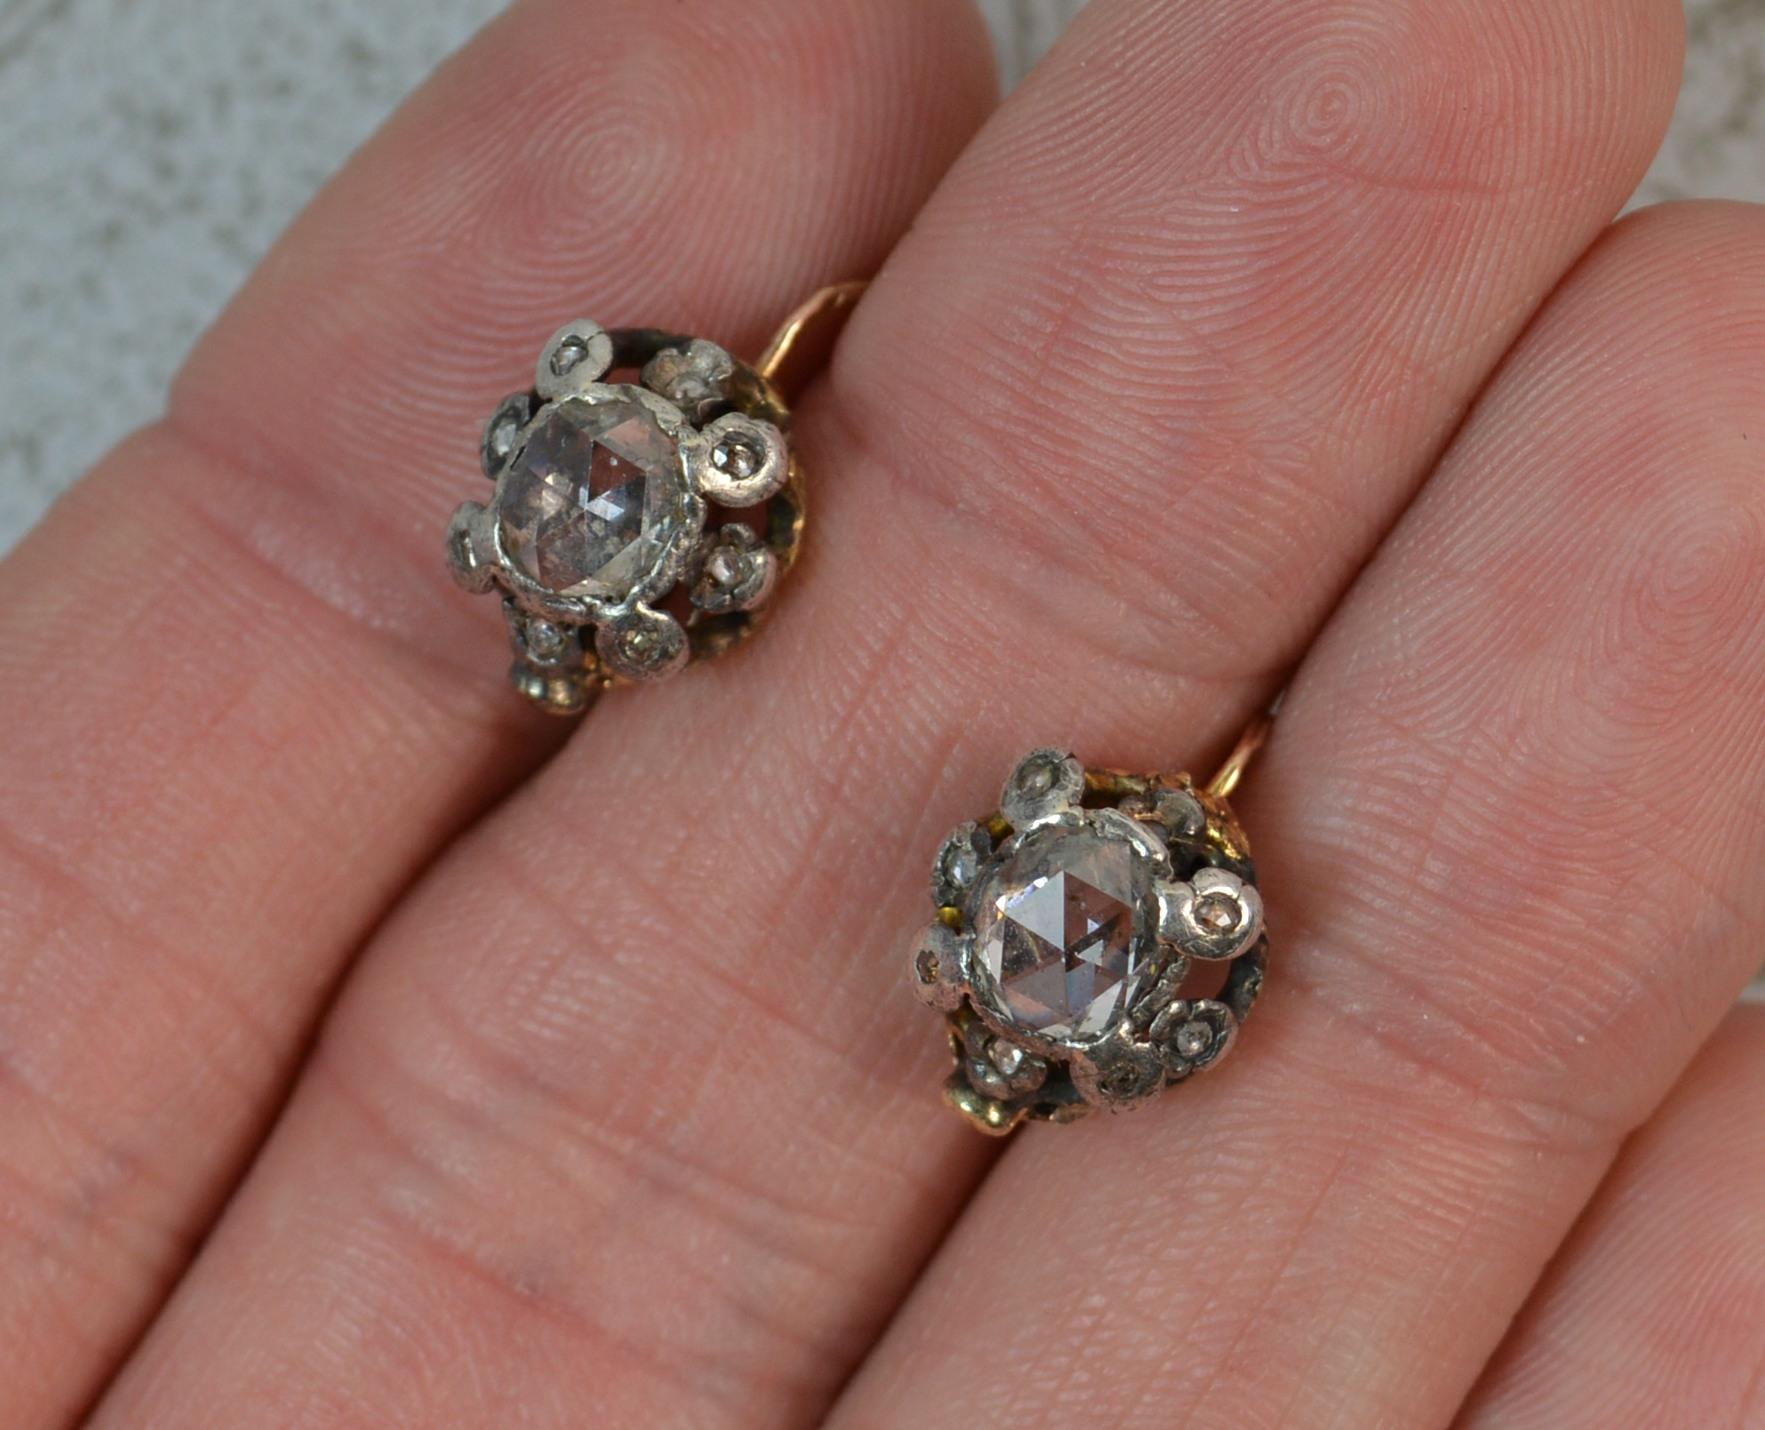 A superb pair of early Georgian period earrings. c1800.
Modelled with 18 carat gold lever backs and silver head collet settings, typical of the era.
5.4mm x 6.2mm centre open back diamonds. Surrounded by tiny little diamonds.

CONDITION ; Good.